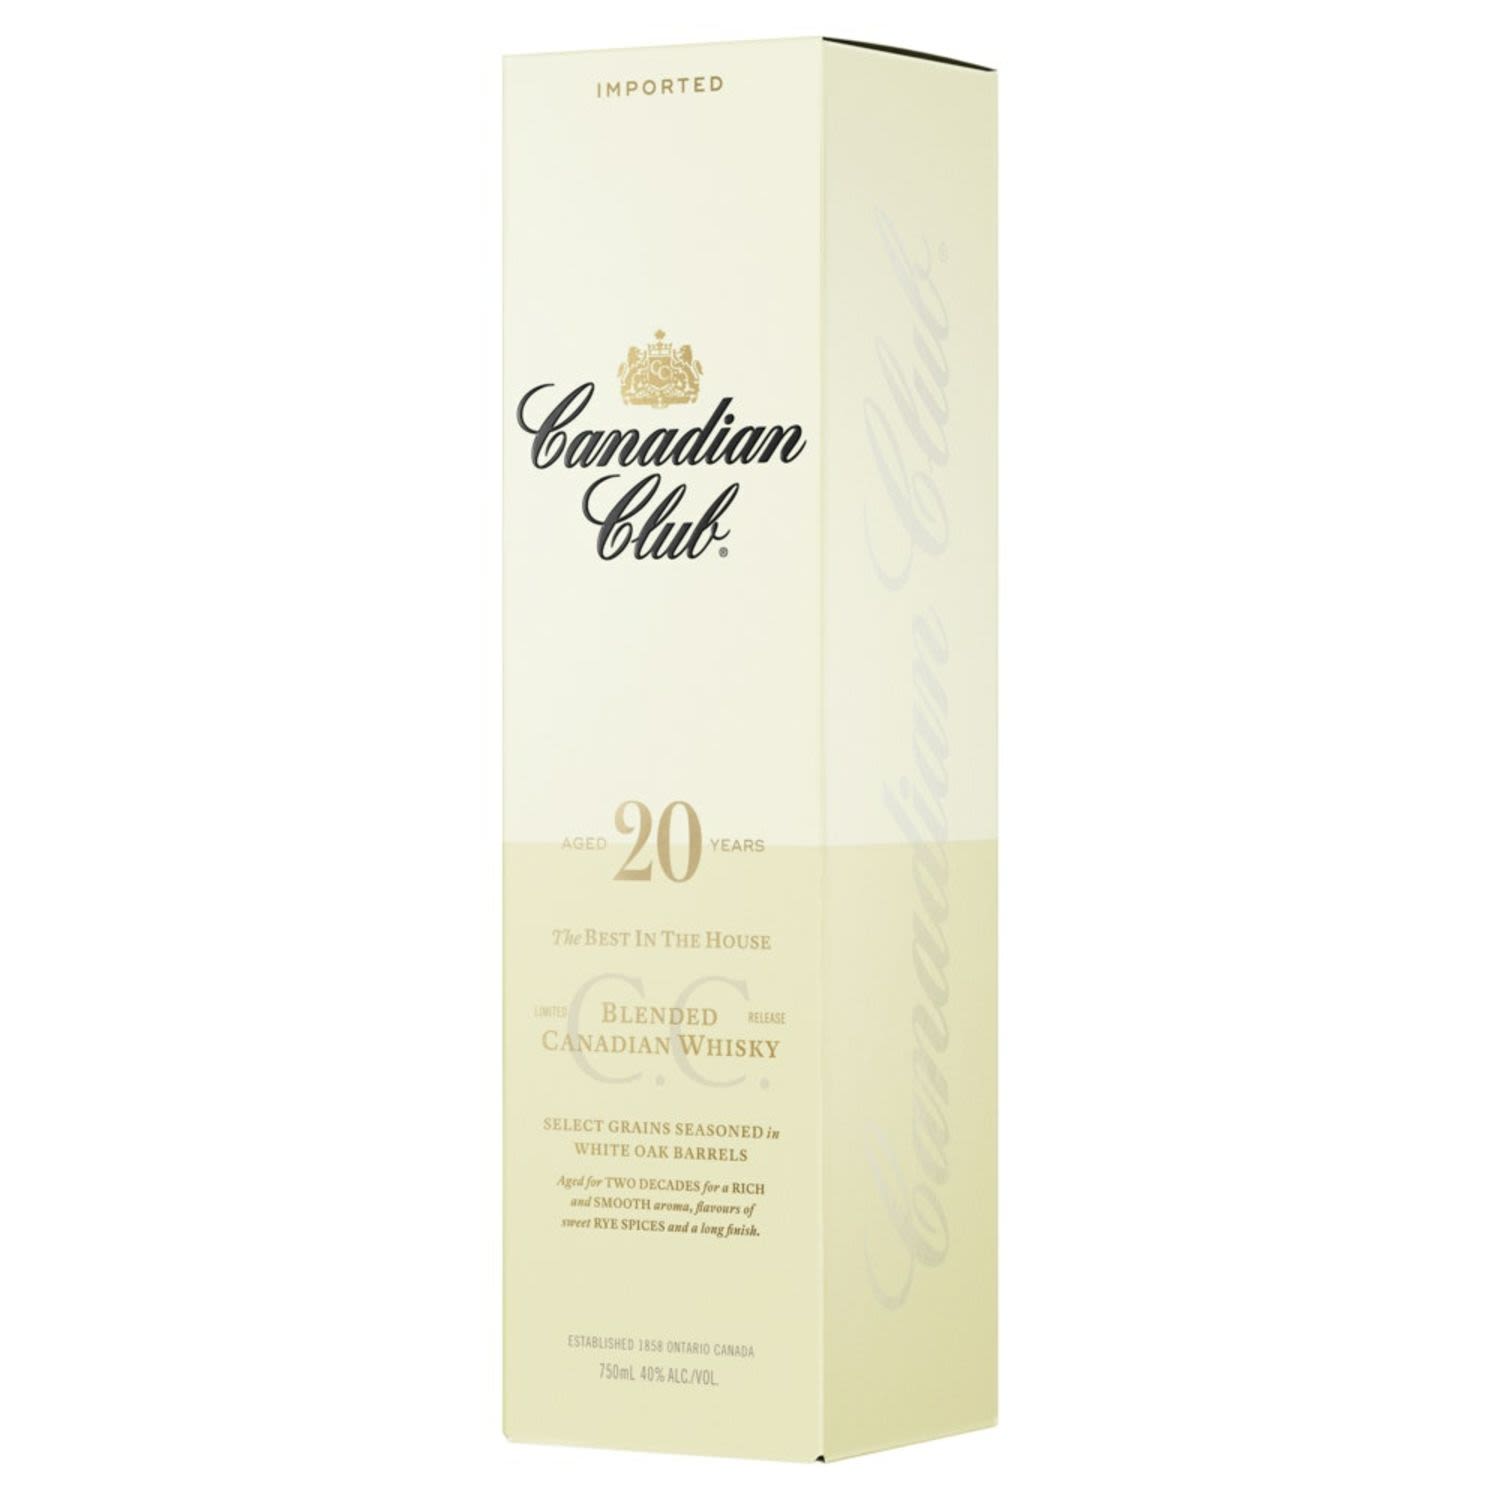 Canadian Club 20 Year Old Blended Canadian Whisky 750mL Bottle